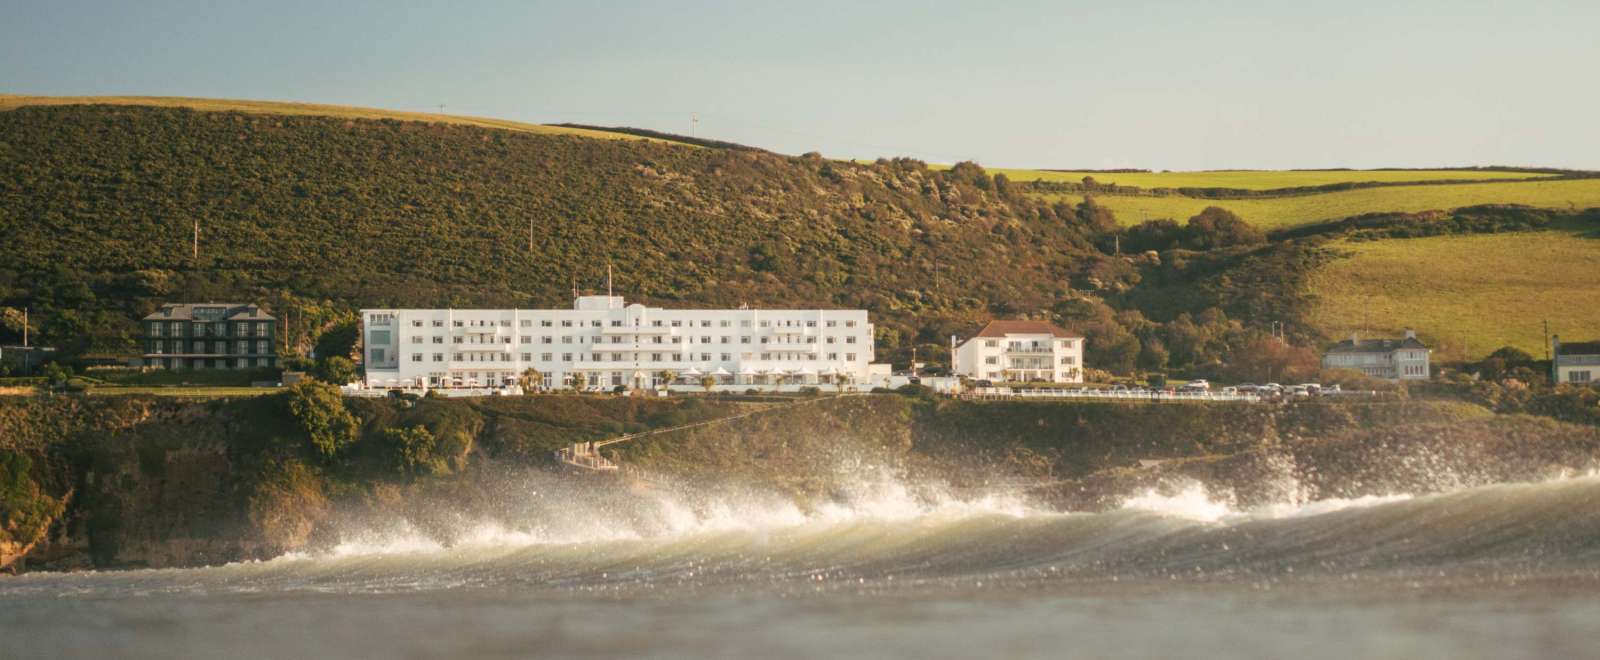 Saunton Sands Hotel Exterior View from Sea with Crashing Wave